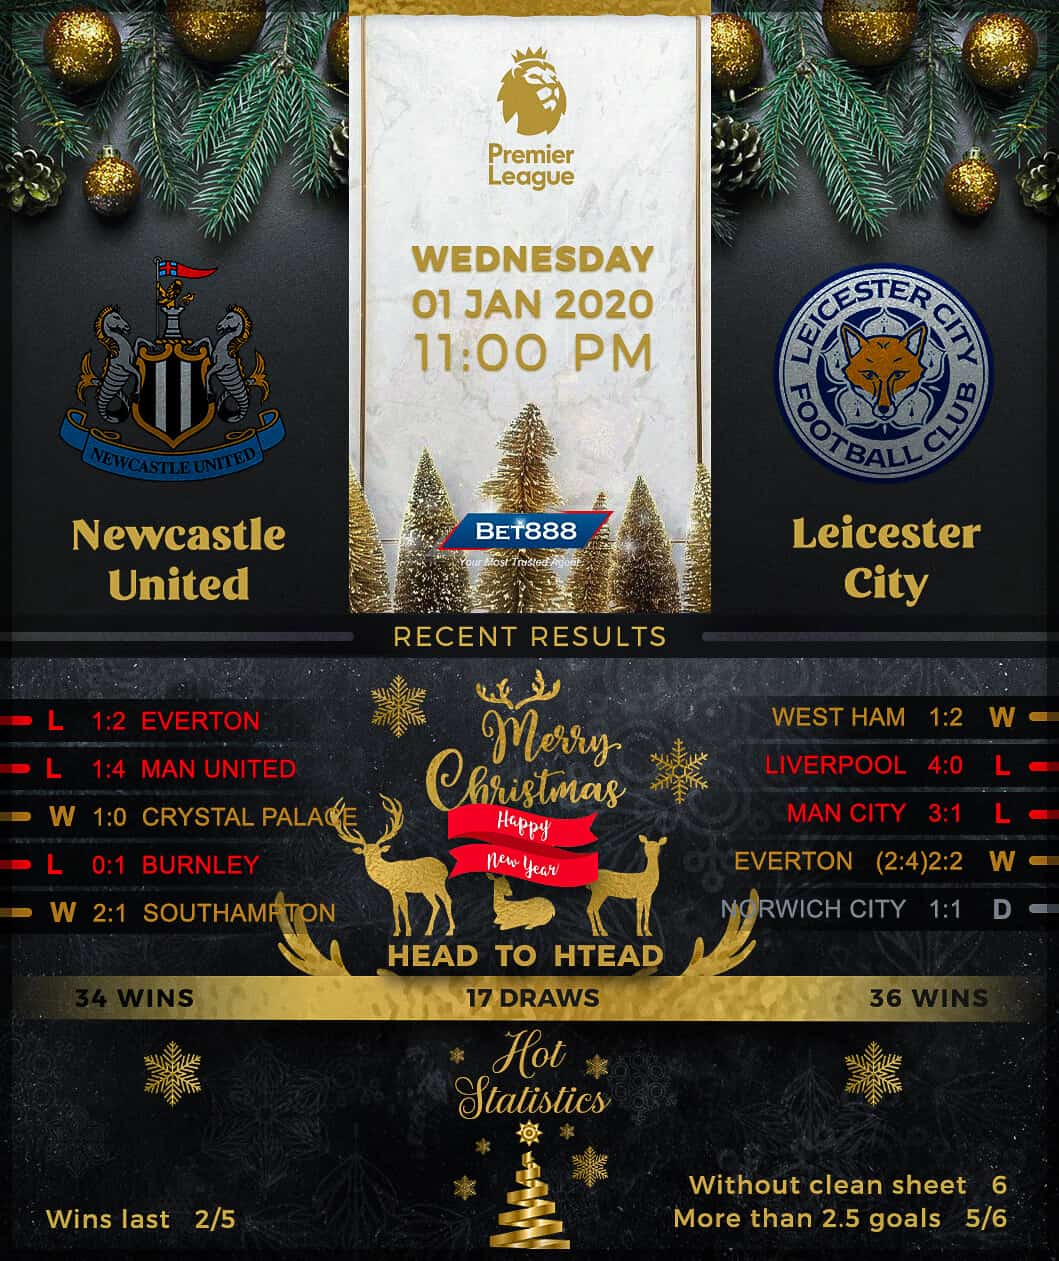 Newcastle United vs Leicester City﻿ 01/01/20